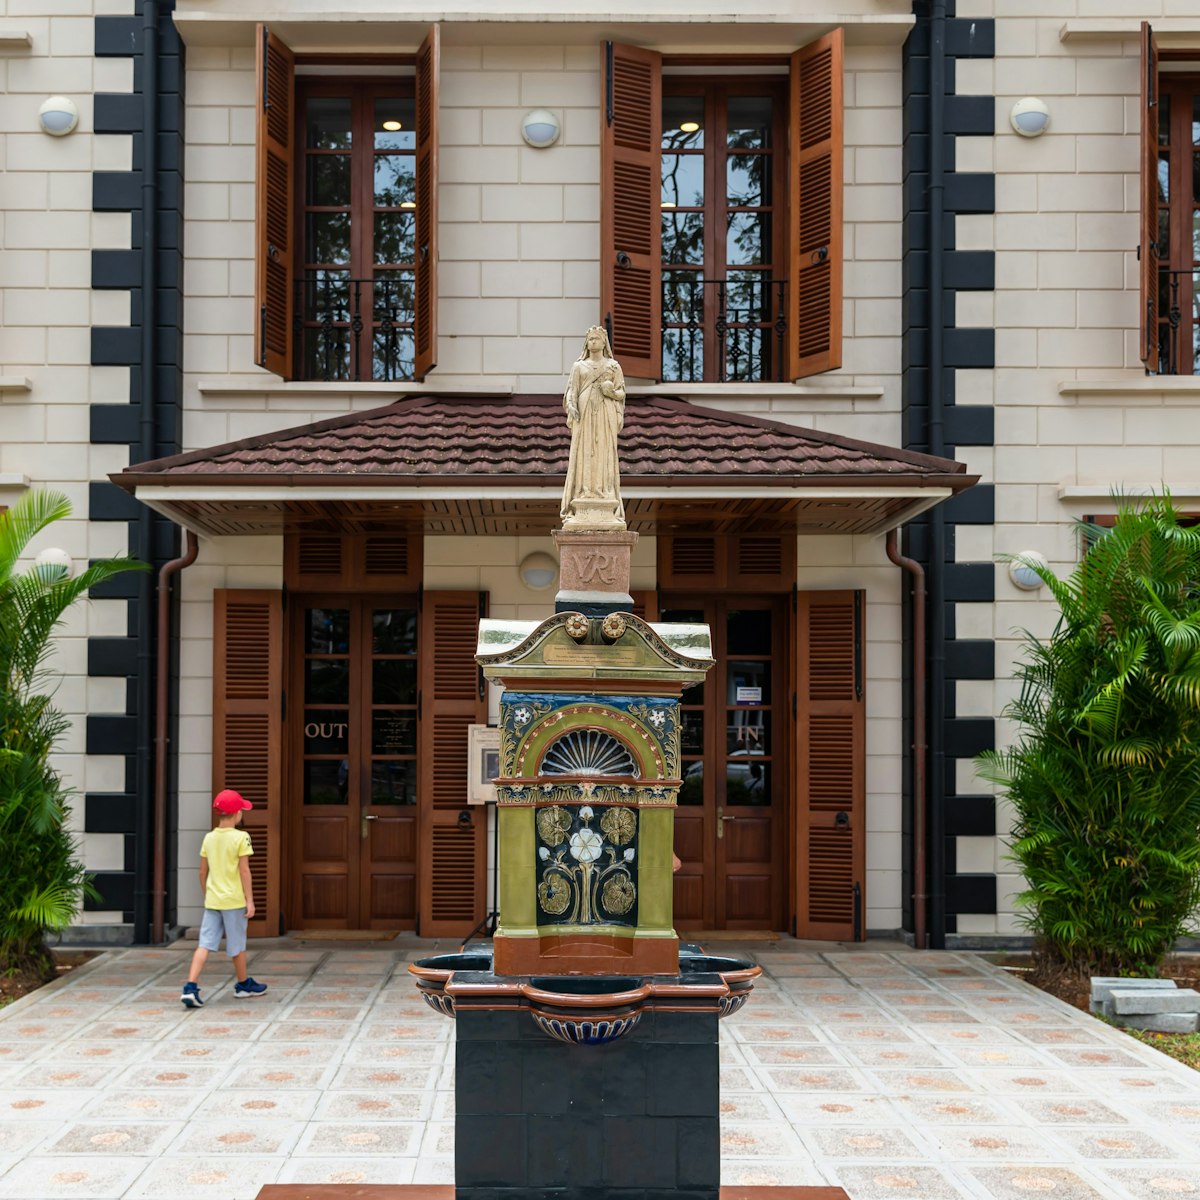 Victoria, Seychelles - January 7, 2020: Tourists in front of Seychelles National History Museum
- National Museum of History, Housed in Victoria's restored colonial-era Supreme Court building (1885), this terrific museum opened in late 2018